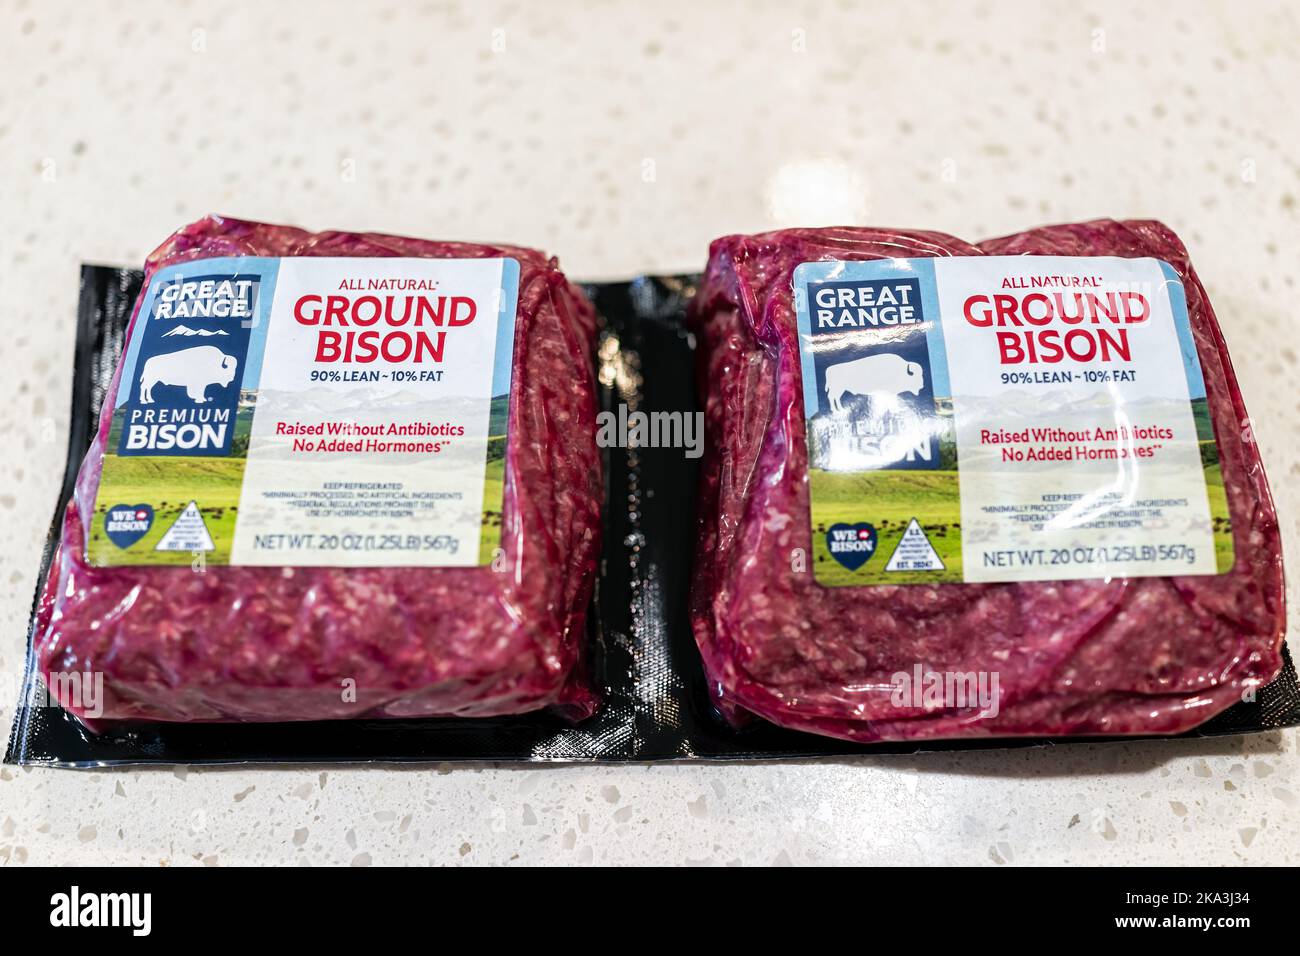 Naples, USA - April 29, 2022: Macro closeup of two plastic wrap red raw uncooked ground bison meat from Great Range brand company grass-fed raised wit Stock Photo